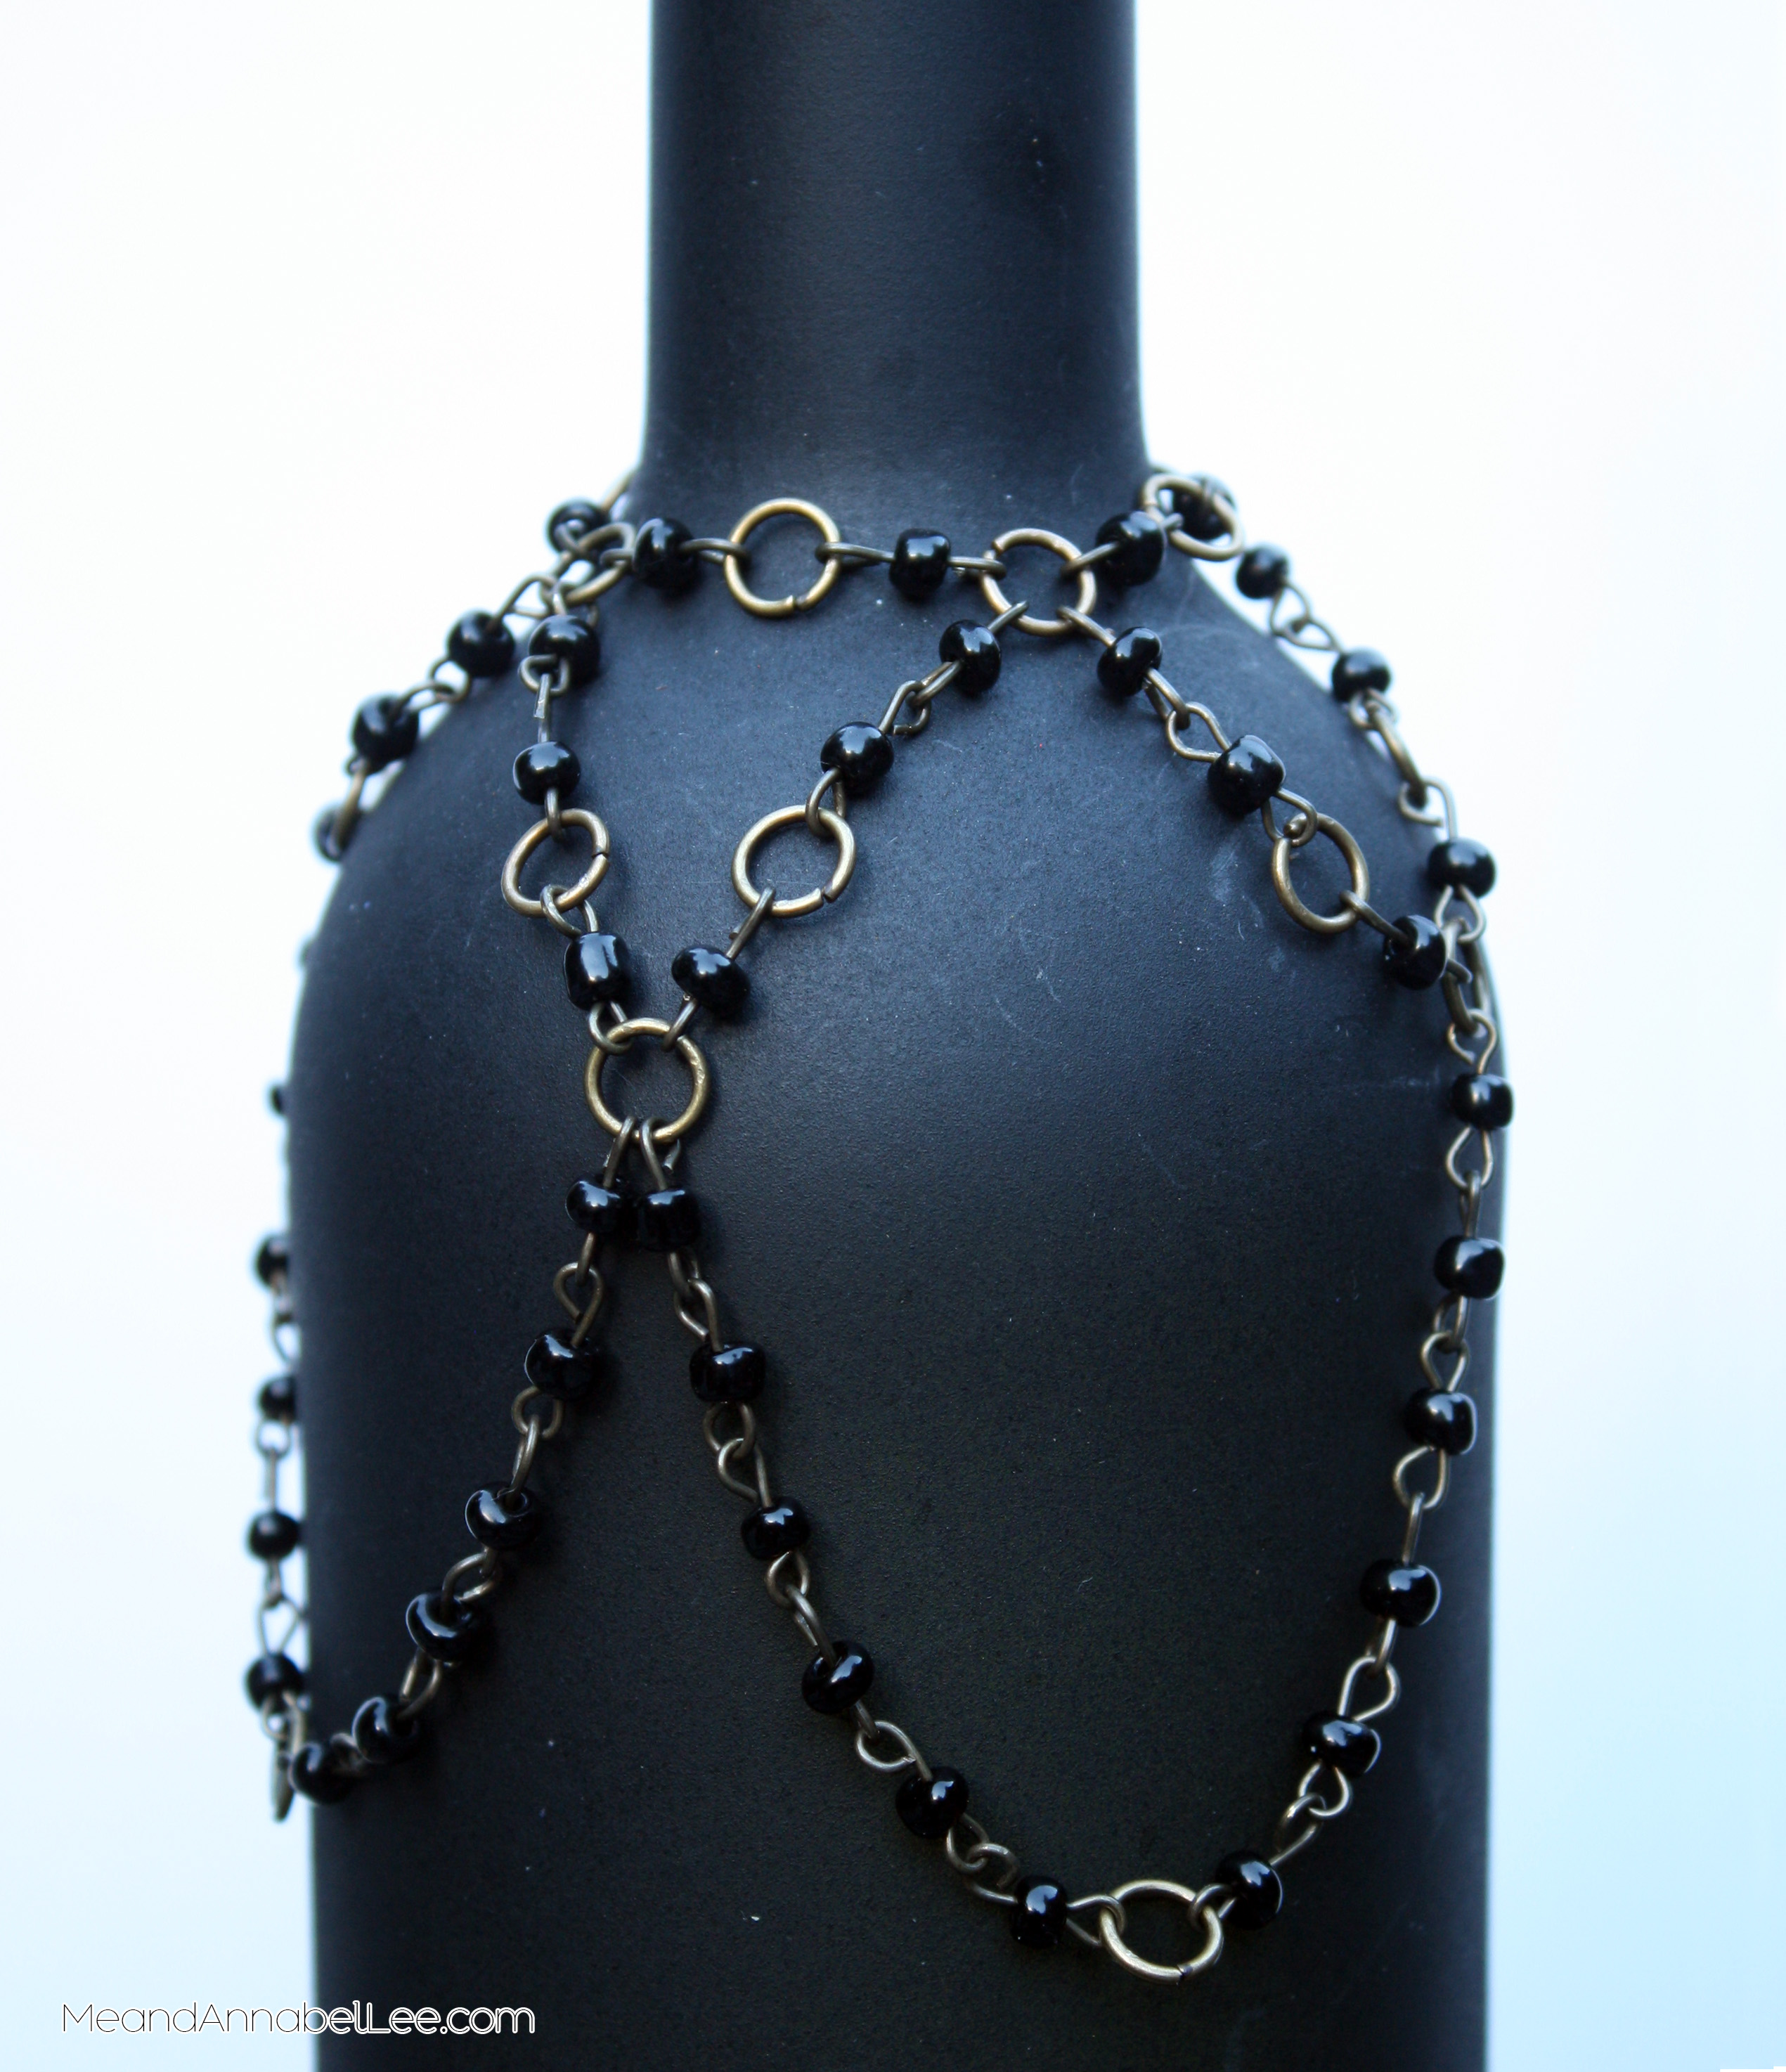 Gothic Glam BGothic Glam Beaded Wine Bottle Cover - Step 4-9 - Goth It yourself - Black & Gold Entertaining - www.MeandAnnabelLee.com - Blog for all things Dark, Gothic, Victorian, & Unusualeaded Wine Bottle Cover - Step 4-6 - Goth It yourself - Black & Gold Entertaining - www.MeandAnnabelLee.com - Blog for all things Dark, Gothic, Victorian, & Unusual